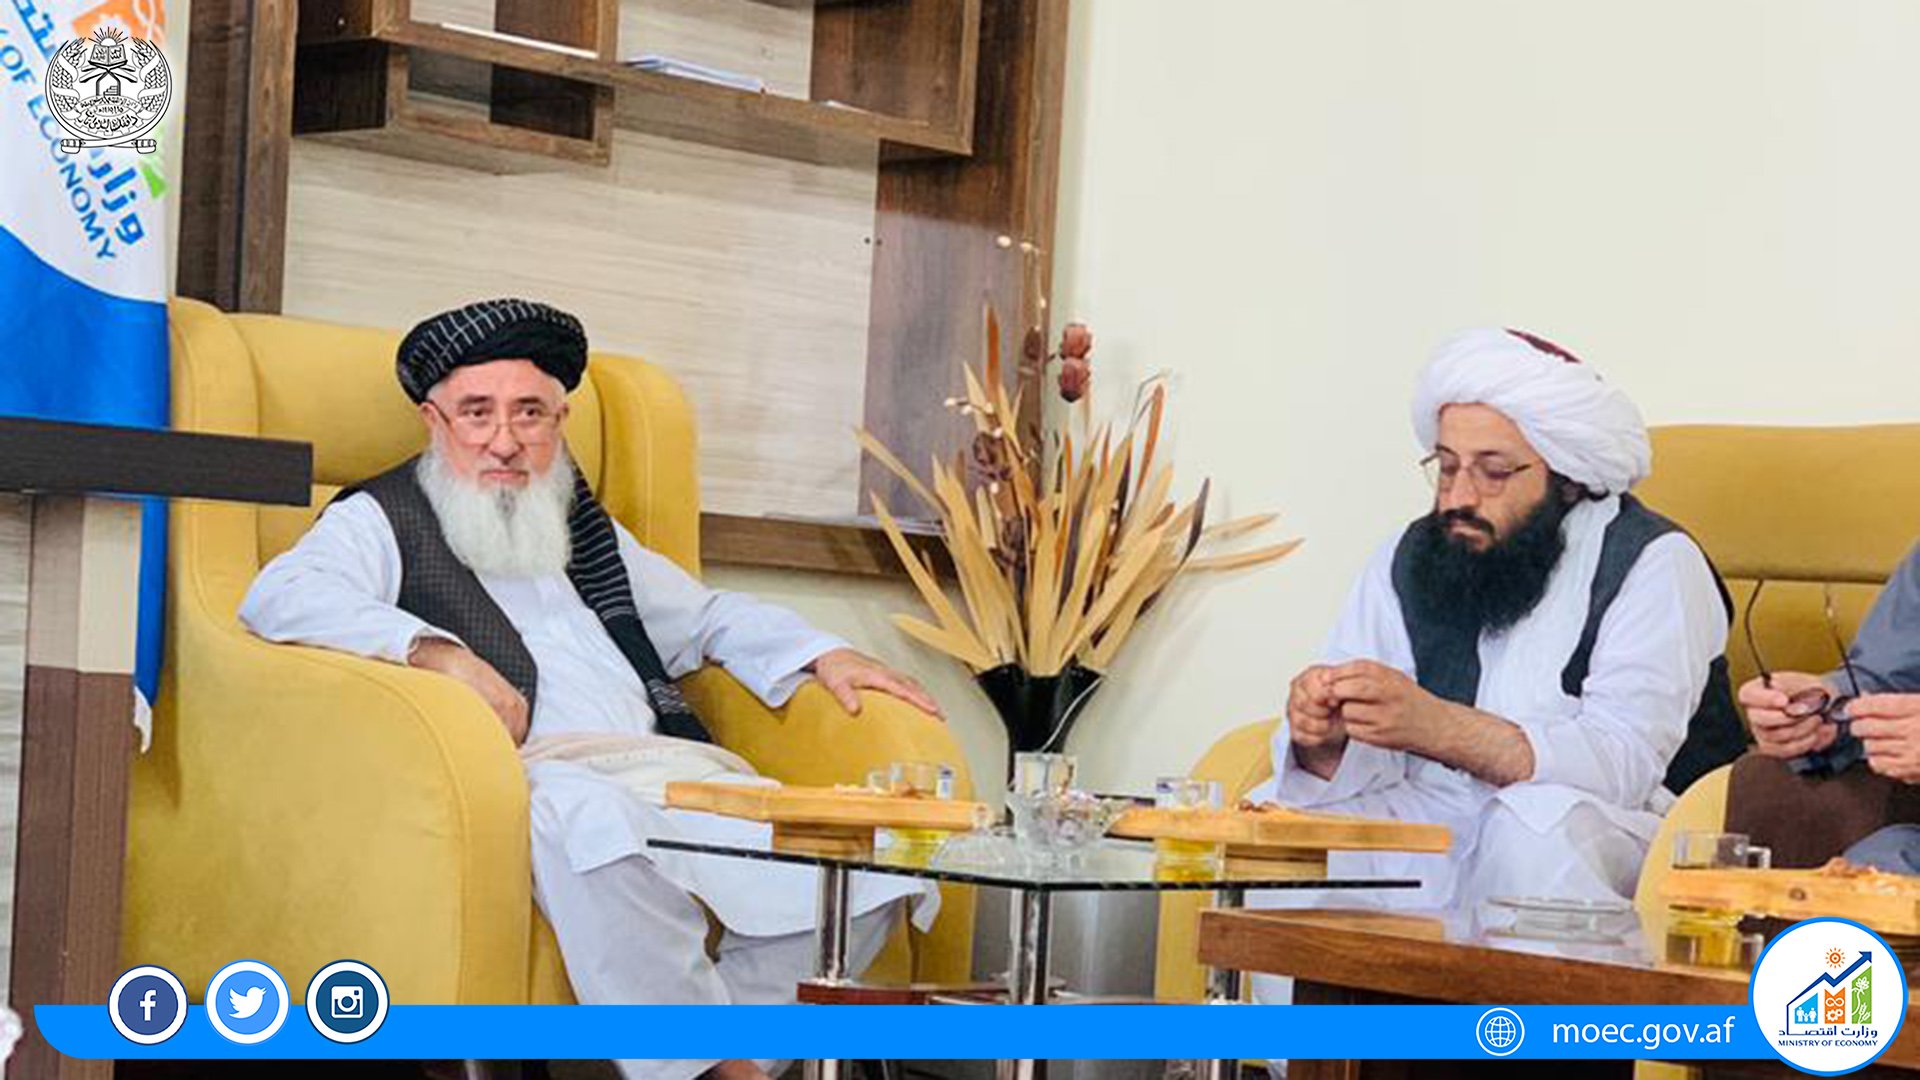 On Saturday, 06/03/2023, which coincides with the 14th of the month of Zul-Qada, 1444, Alhaj Qari Din Muhammad Hanif, acting minister of the Ministry of Economy, and Mufti Abdul Salam Ashrafi, the head of the integration of non-governmental organizations, visited the directorate of Kapisa Province thanked and appreciated the work and activities of this directorate.